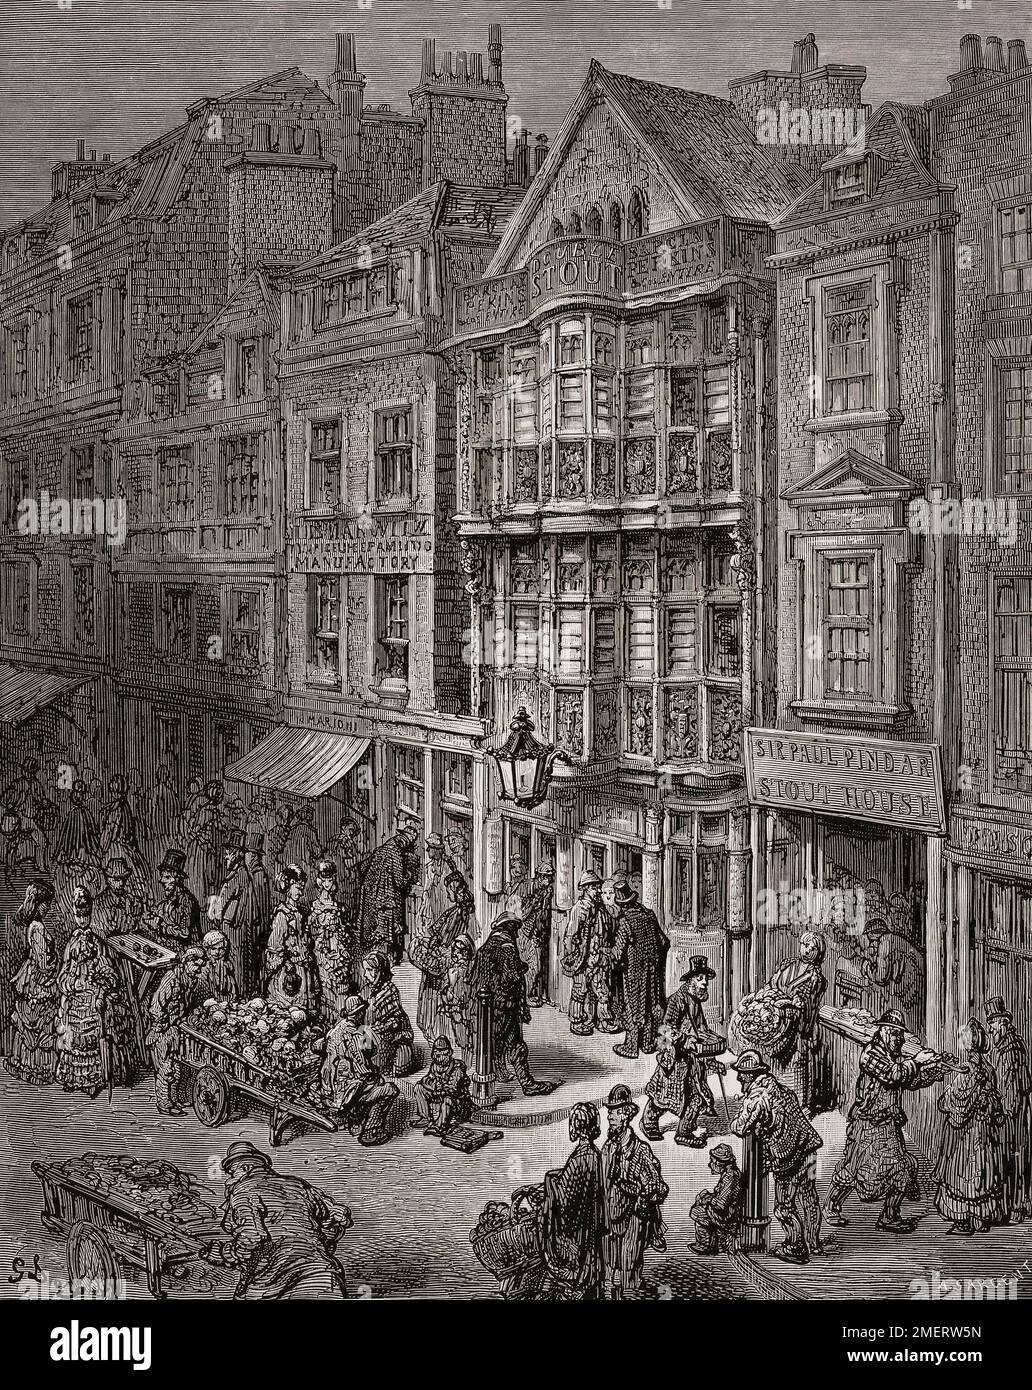 Bishopsgate Street in 19th century London. After an illustration by Gustave Doré in the 1890 American edition of London: A Pilgrimage written by Blanchard Jerrold and illustrated by Gustave Doré. Stock Photo